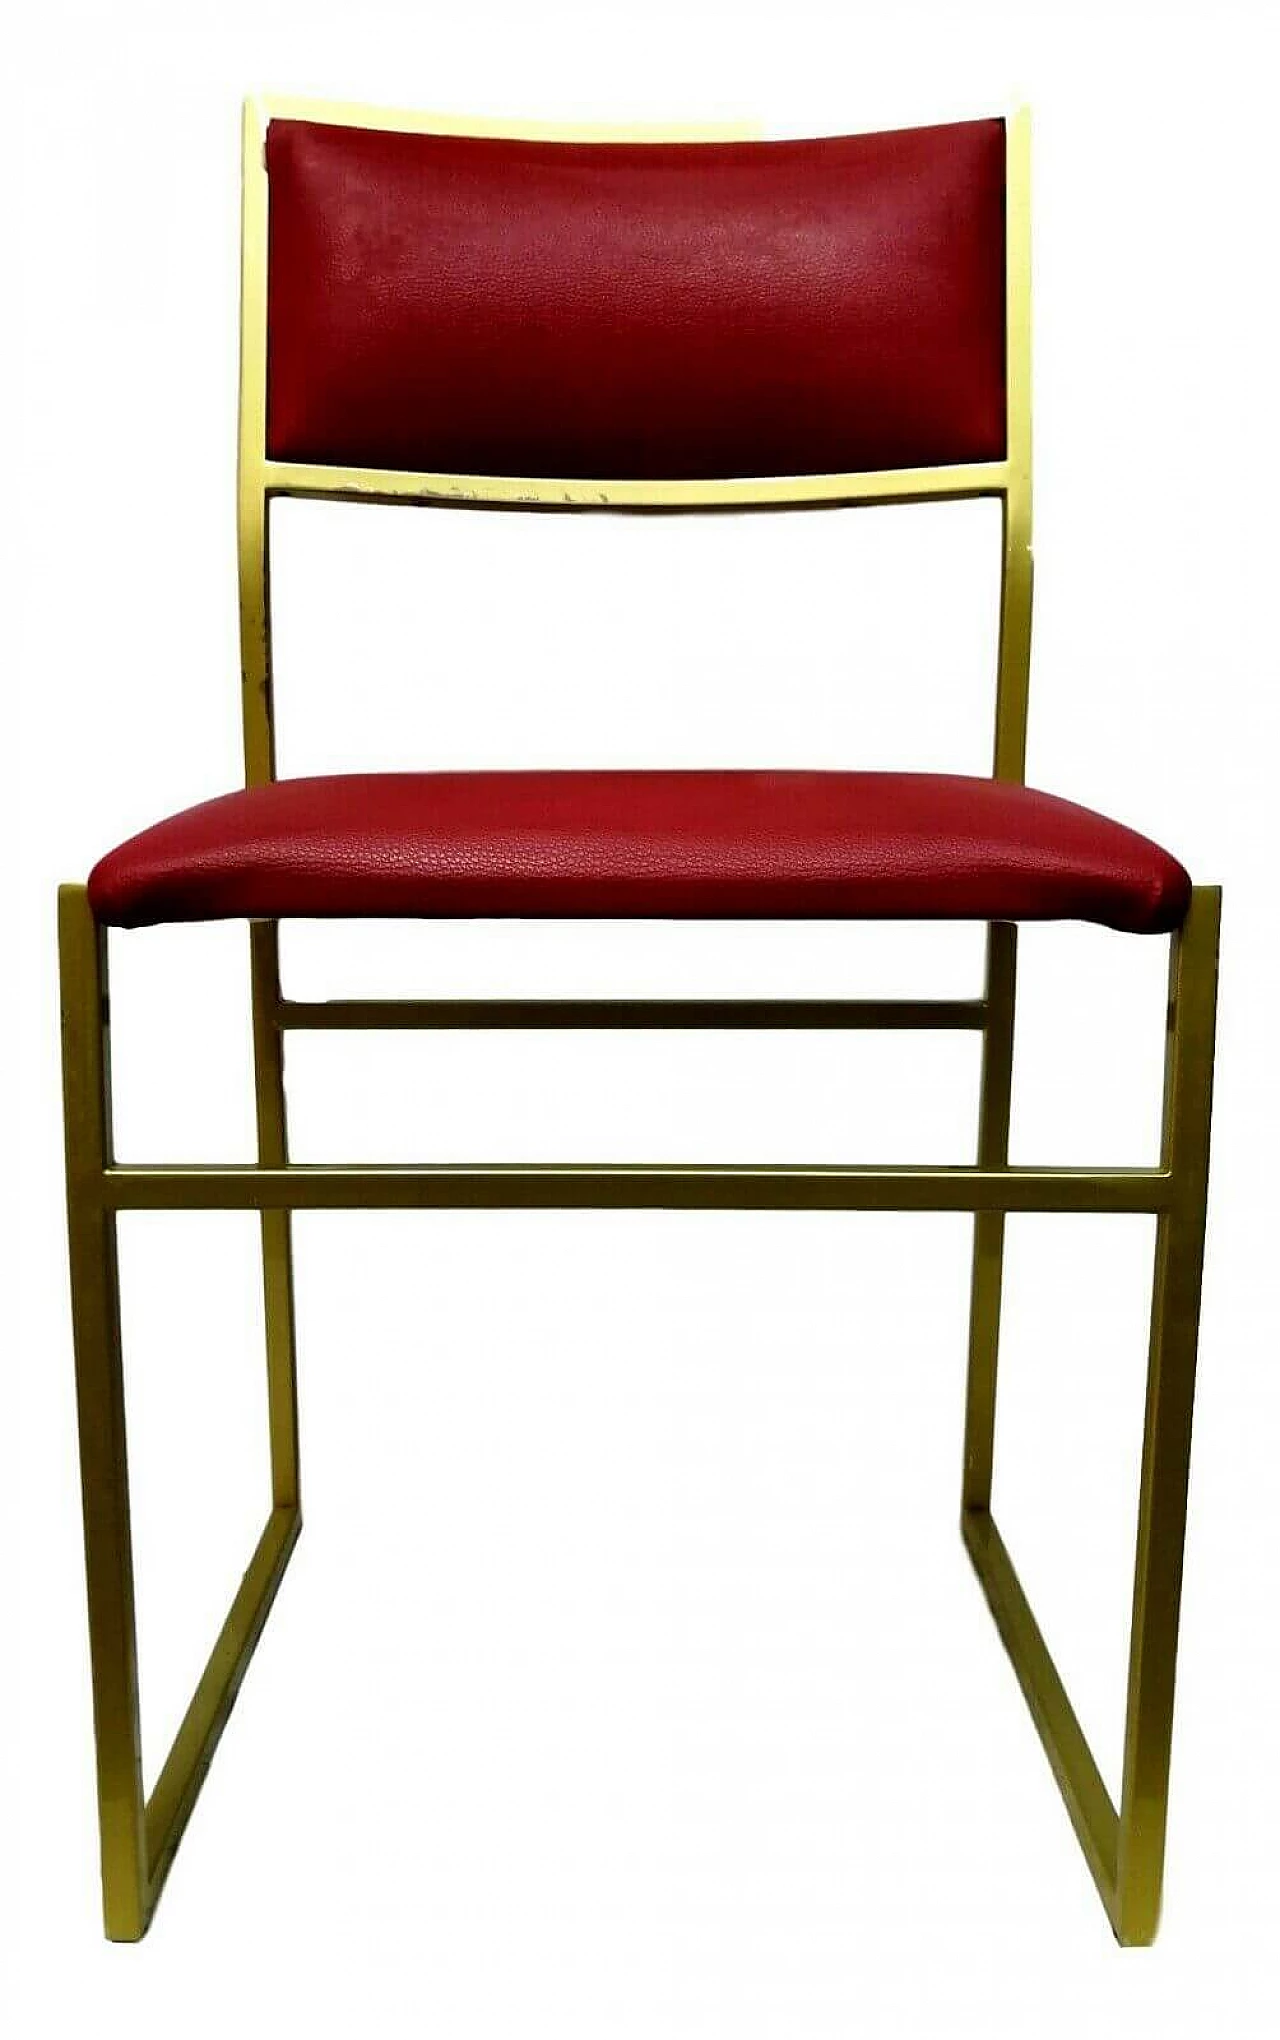 Metal chair and seat in burgundy color, 70's 1166254